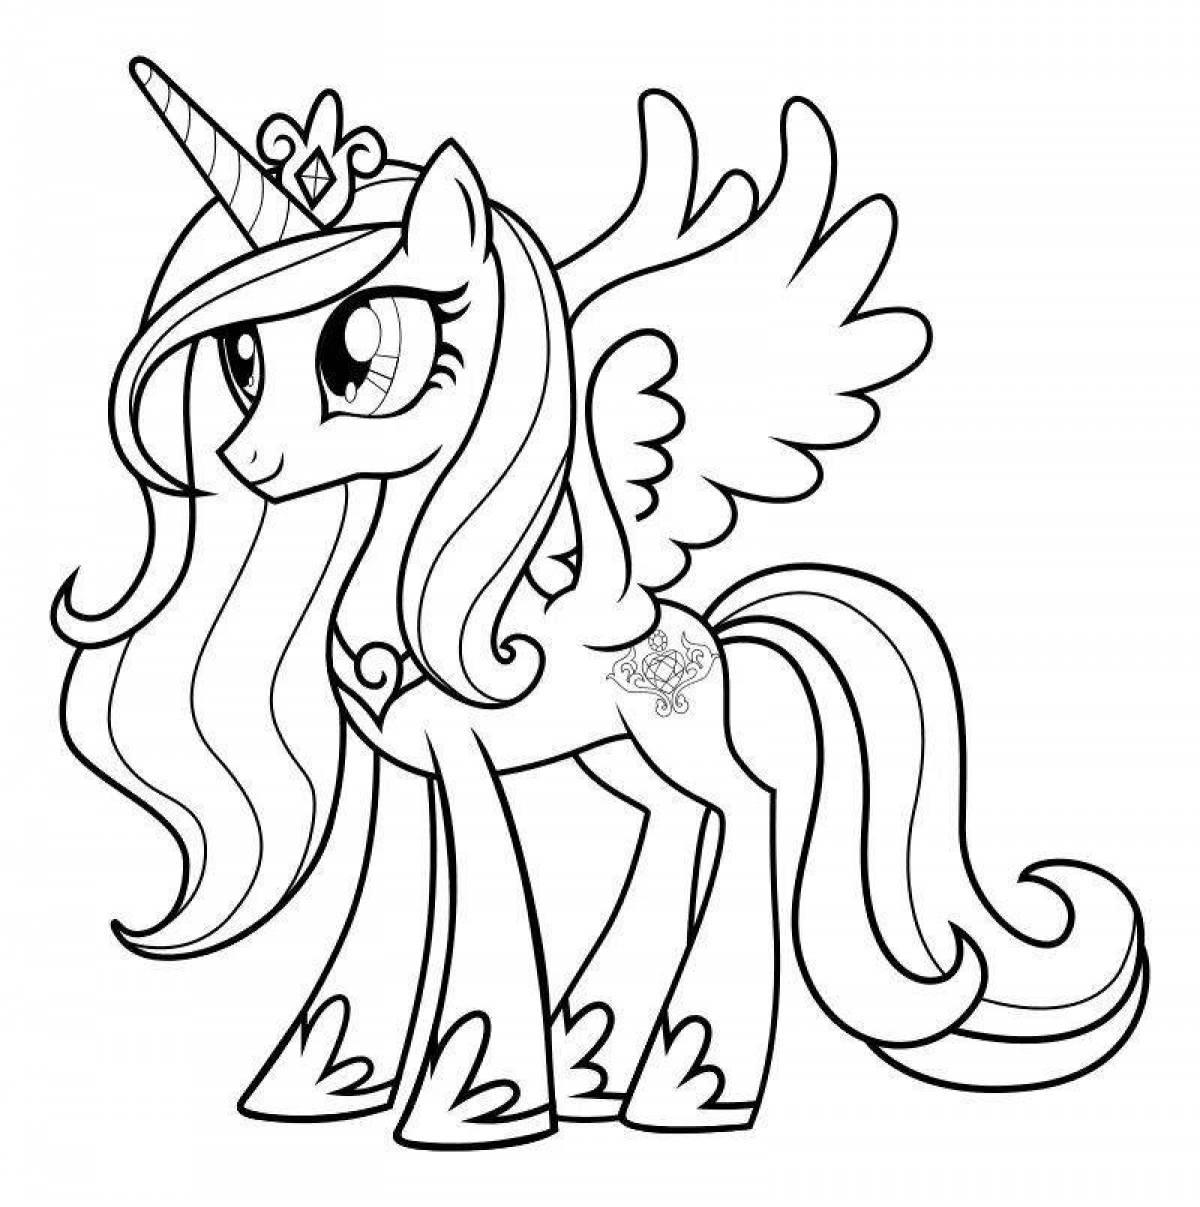 Charming cadence pony coloring book